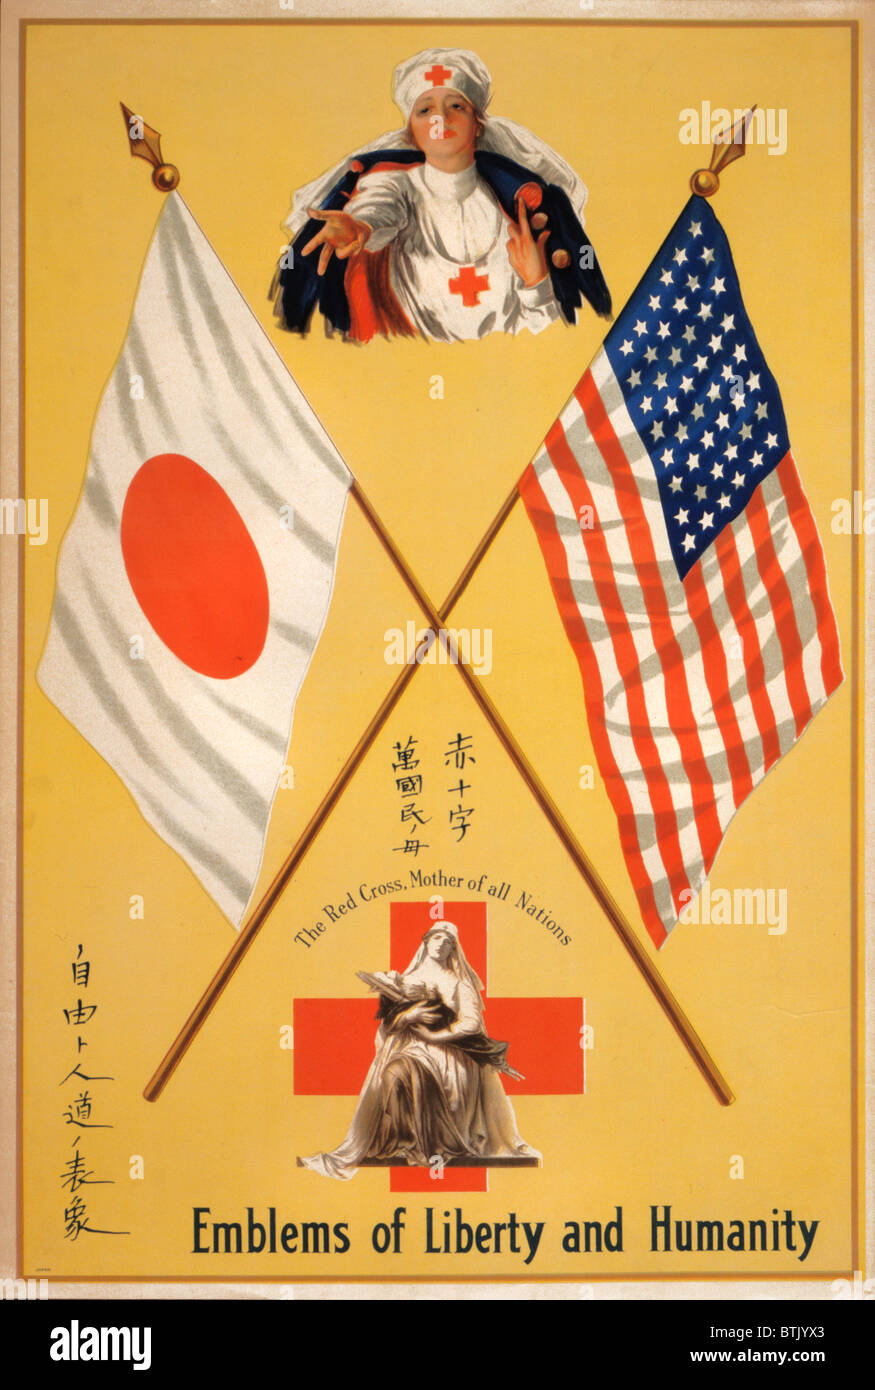 Flag Of Japan International Flags All Countries Poster Tokyo World Picture Photo